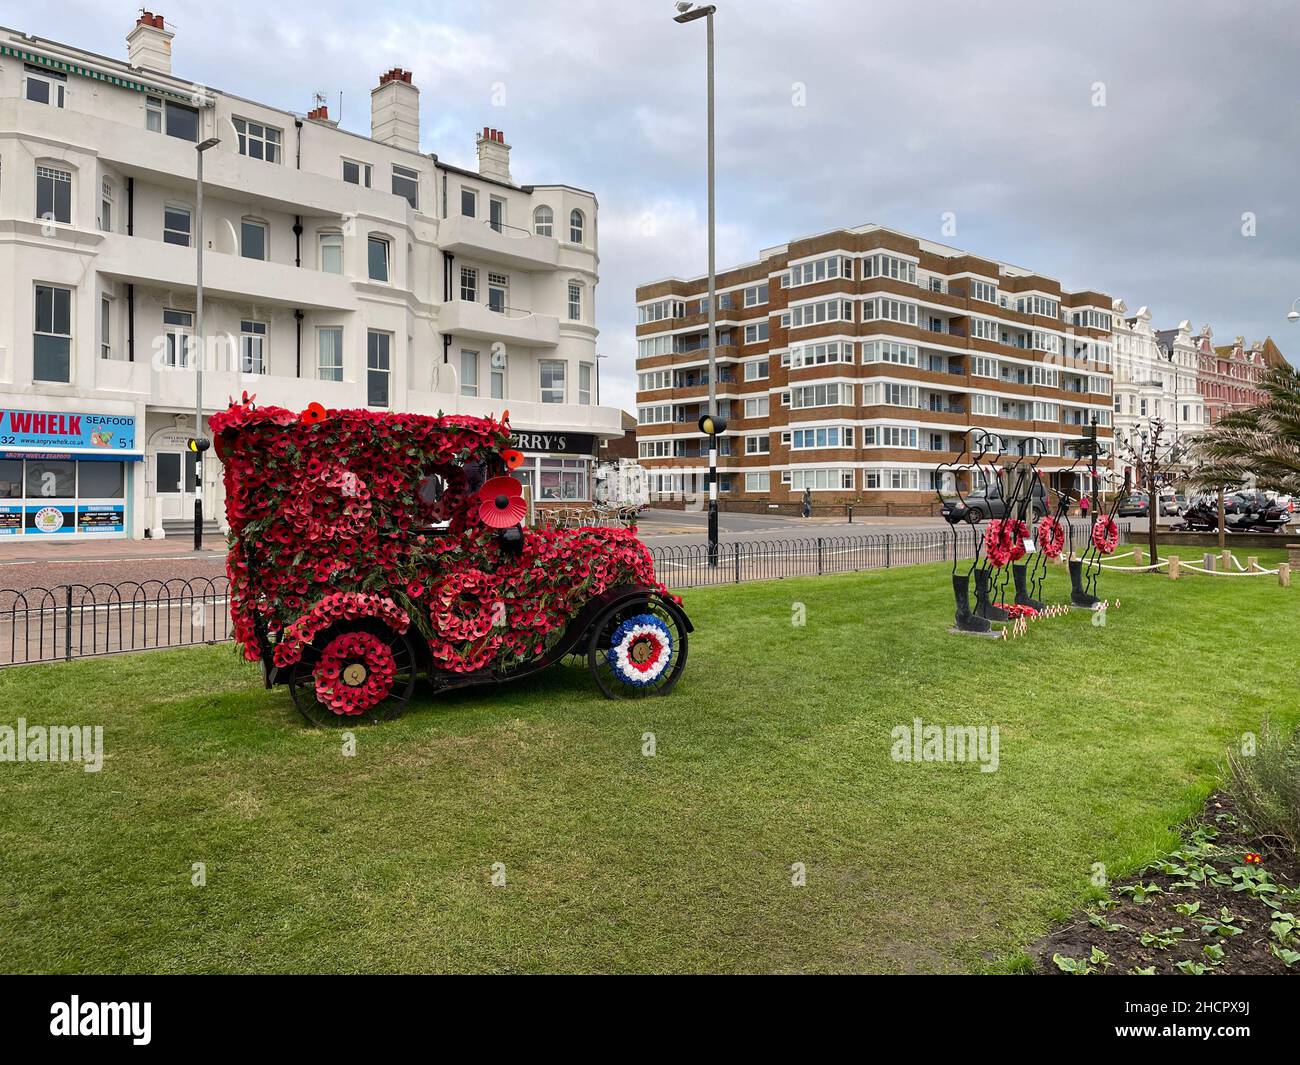 A classic car covered in poppies for Remembrance Day.Metal silhouettes of soldiers with wreaths Stock Photo